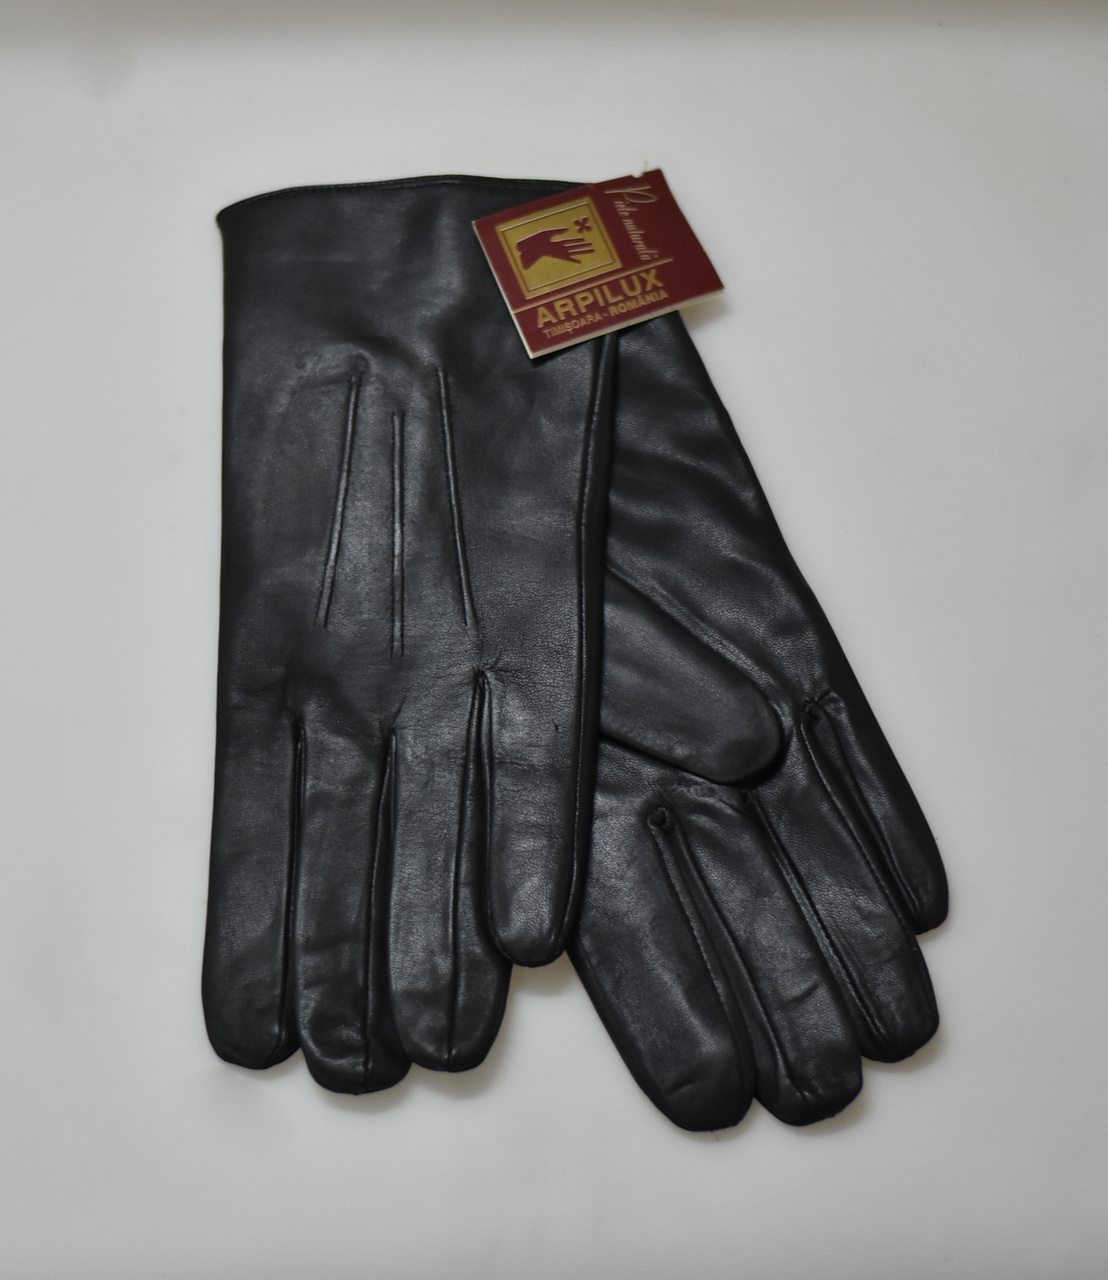 MEN'S LEATHER GLOVES - BLACK - MILITARY SURPLUS ROMANIAN ARMY - LIKE ...